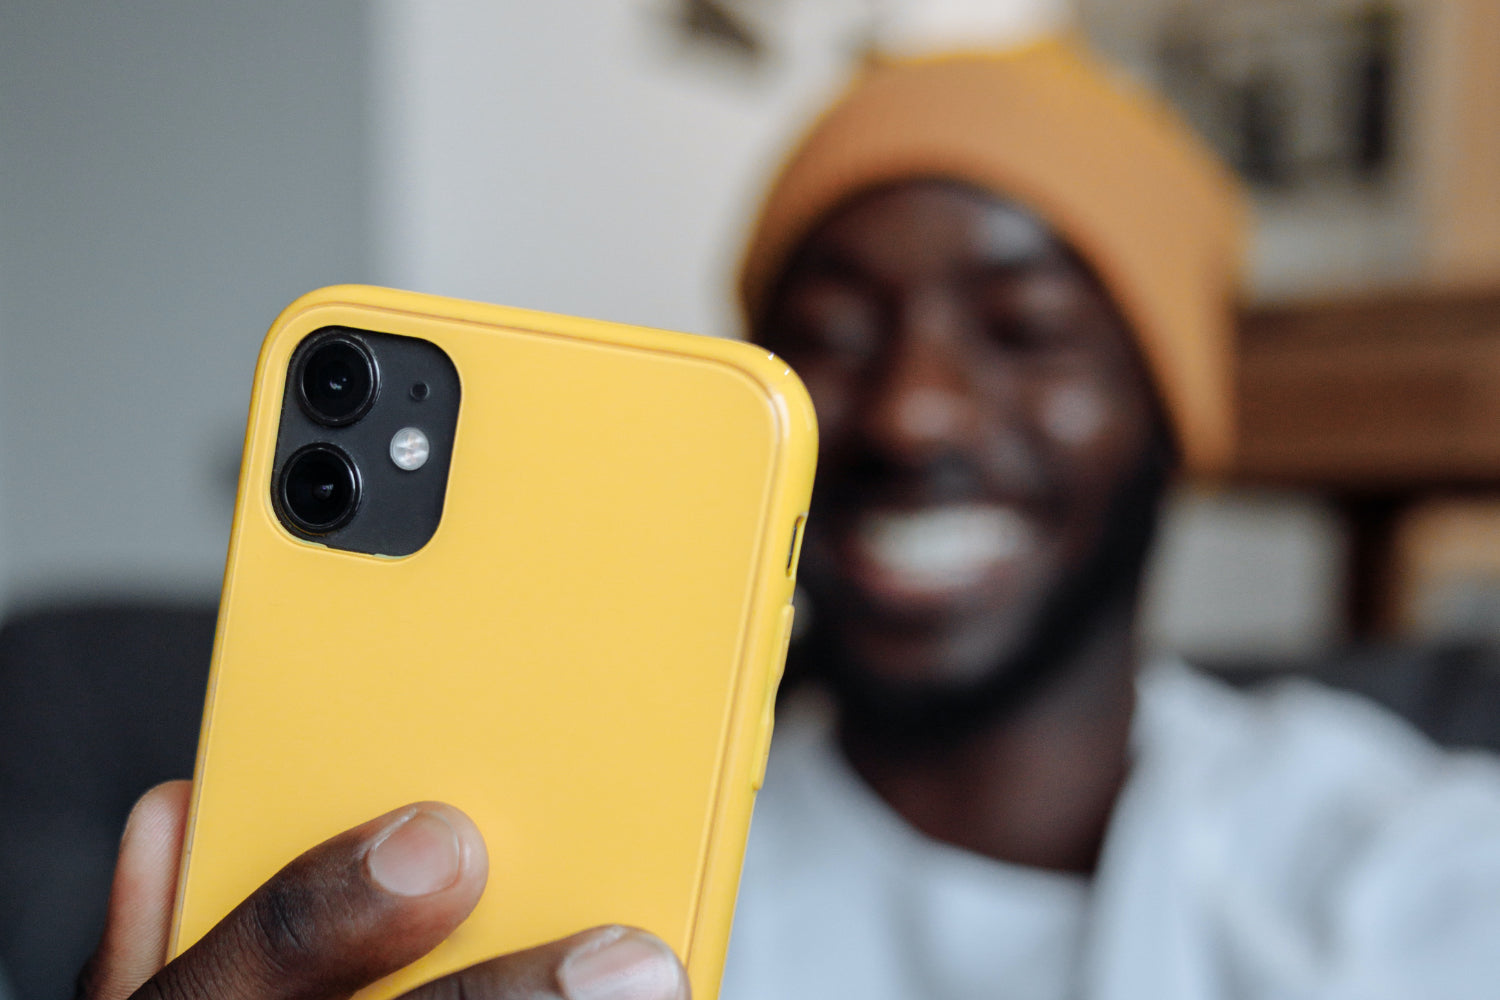 A man smiles while taking a selfie on a yellow mobile phone